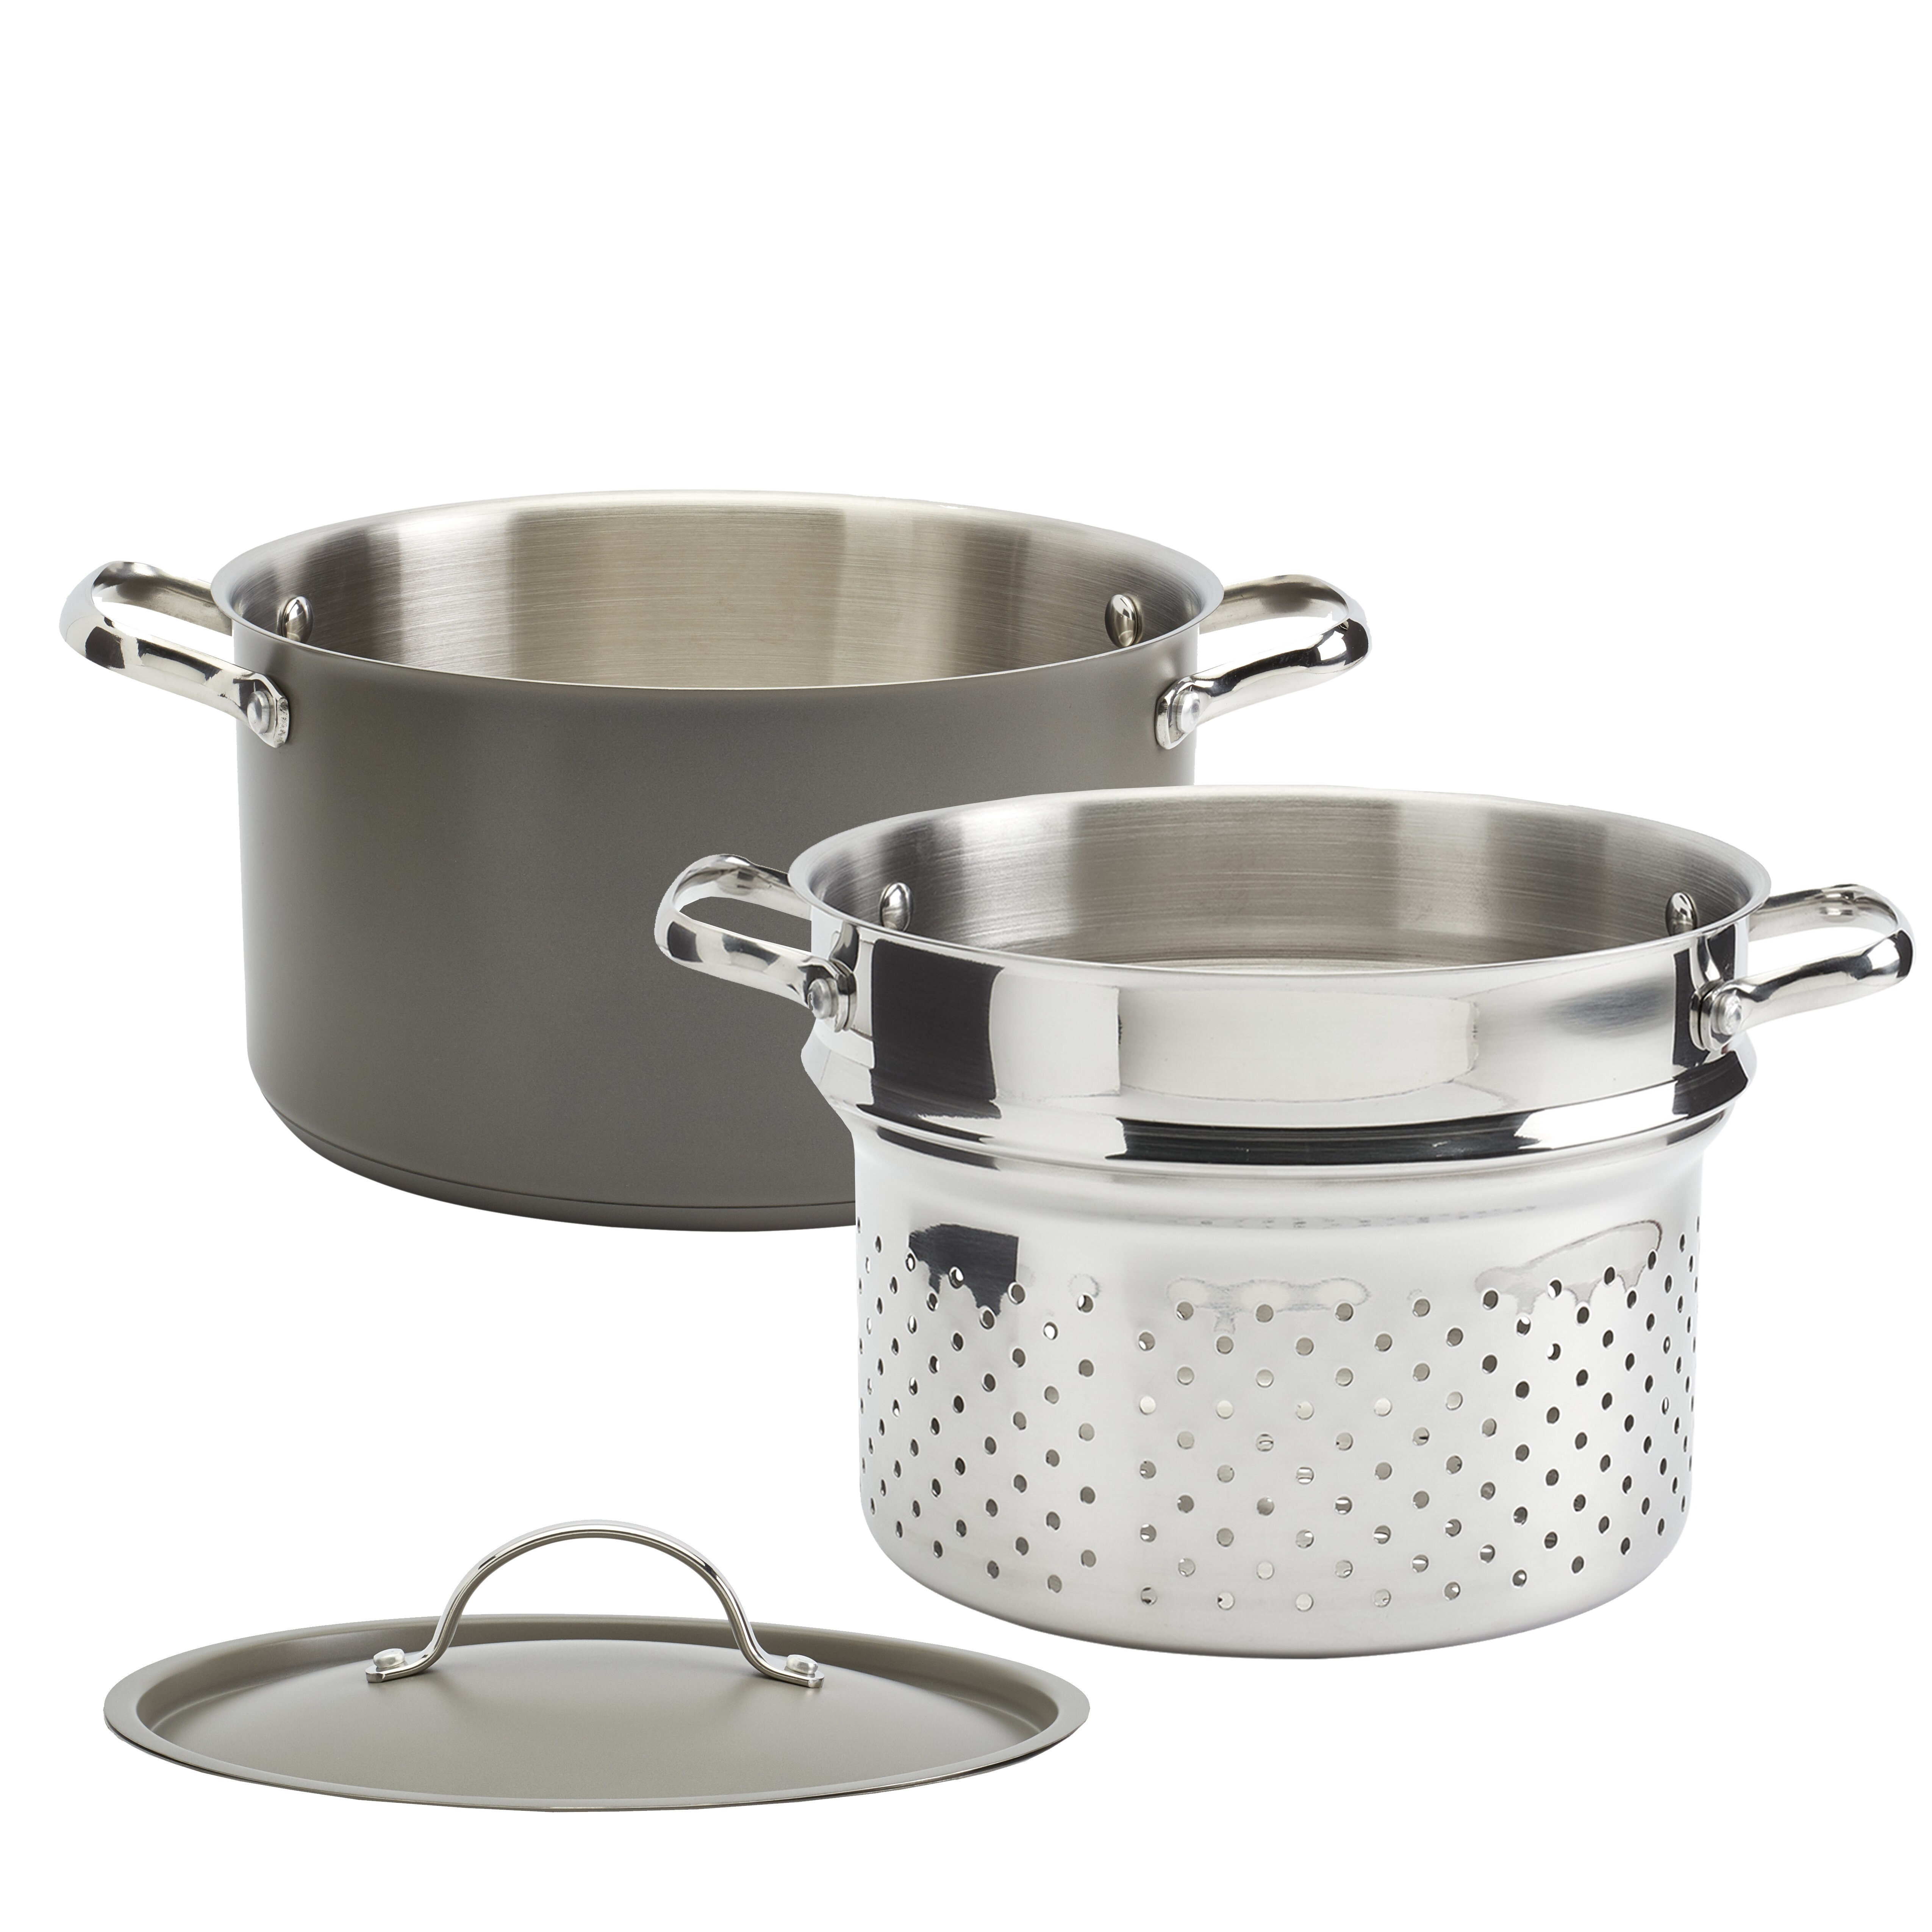 Cuisinart Chef's Classic Stainless Steel 6-Qt. Pasta Pot with Straining  Cover + Reviews